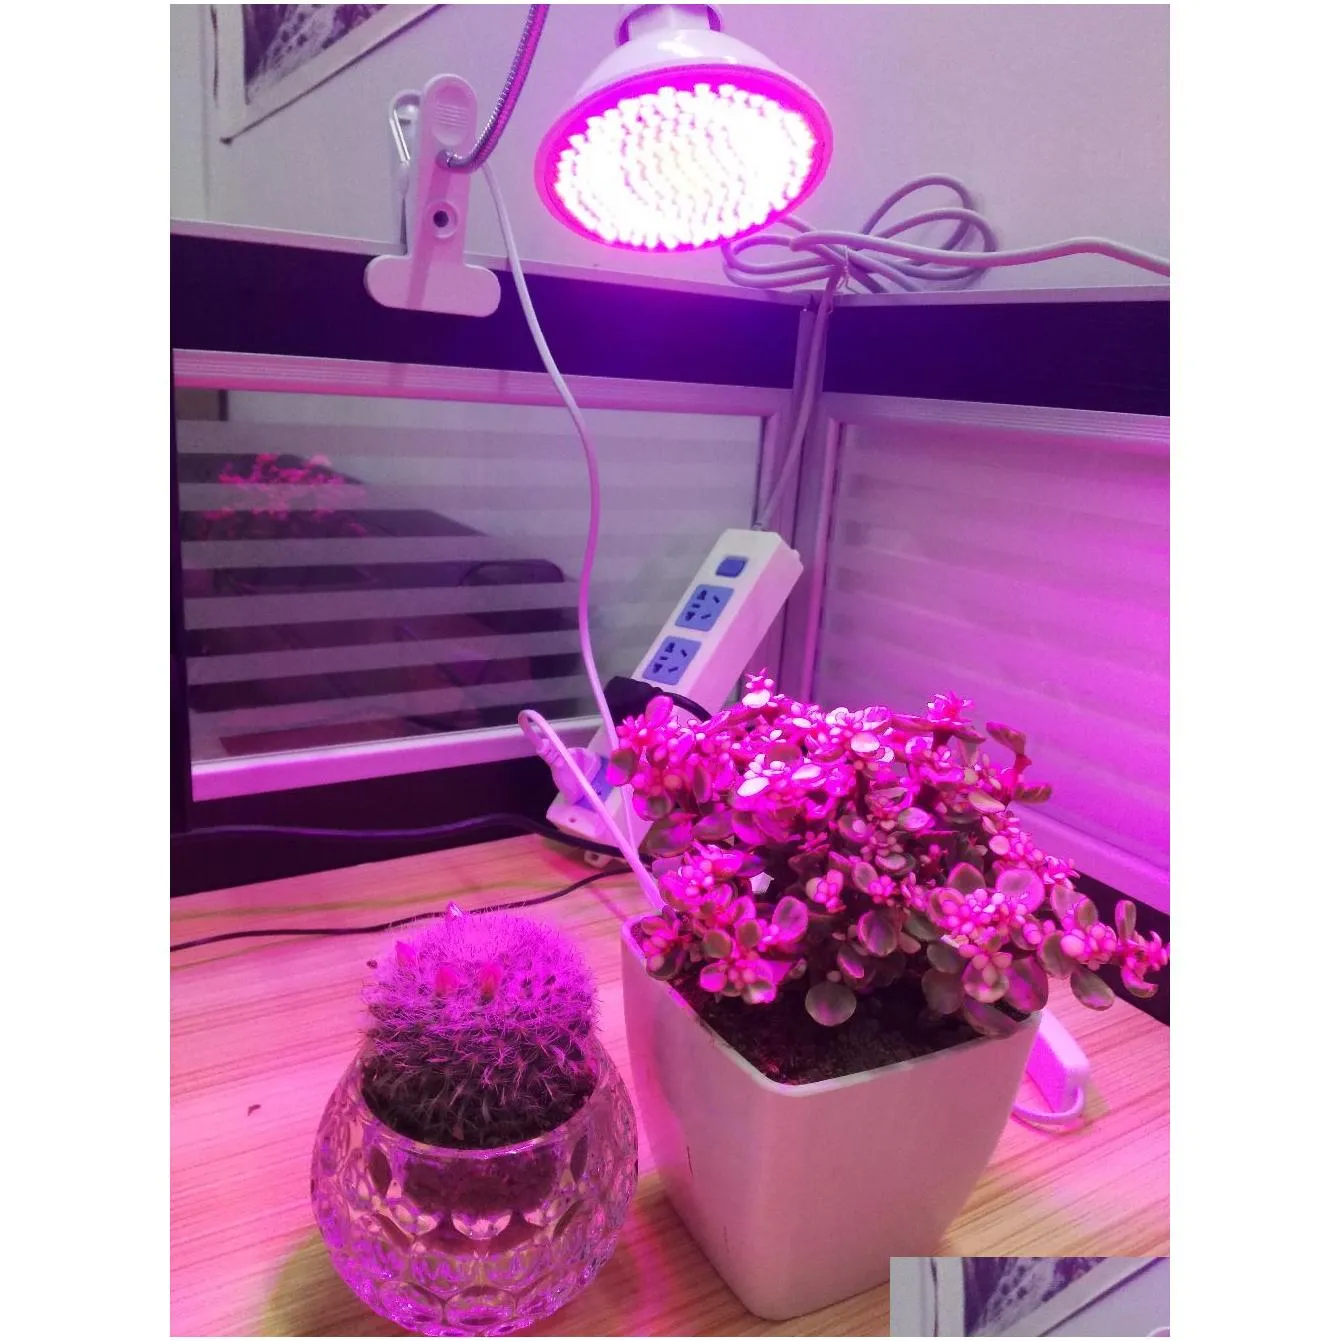 60 126 200 led grow light bulb 360 flexible lamp holder clip for plant flower vegetable growing indoor greenhouse hydroponics d2.0